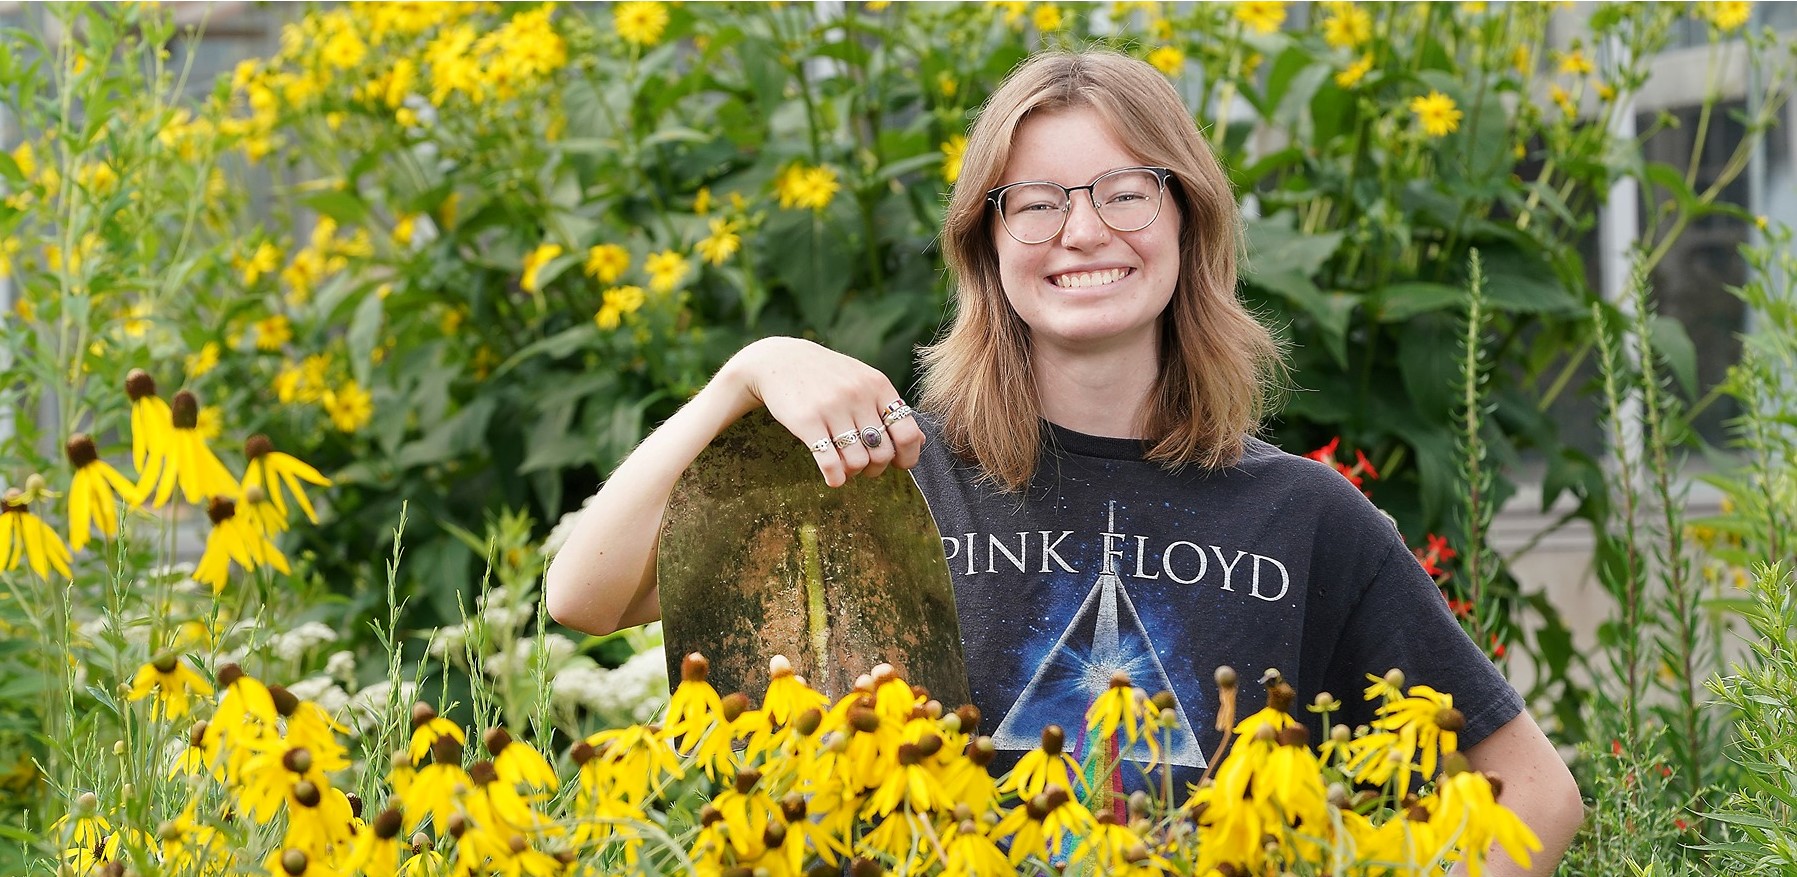 Mackenzie Sandusky poses in front of tall yellow flowers leaning on a shovel